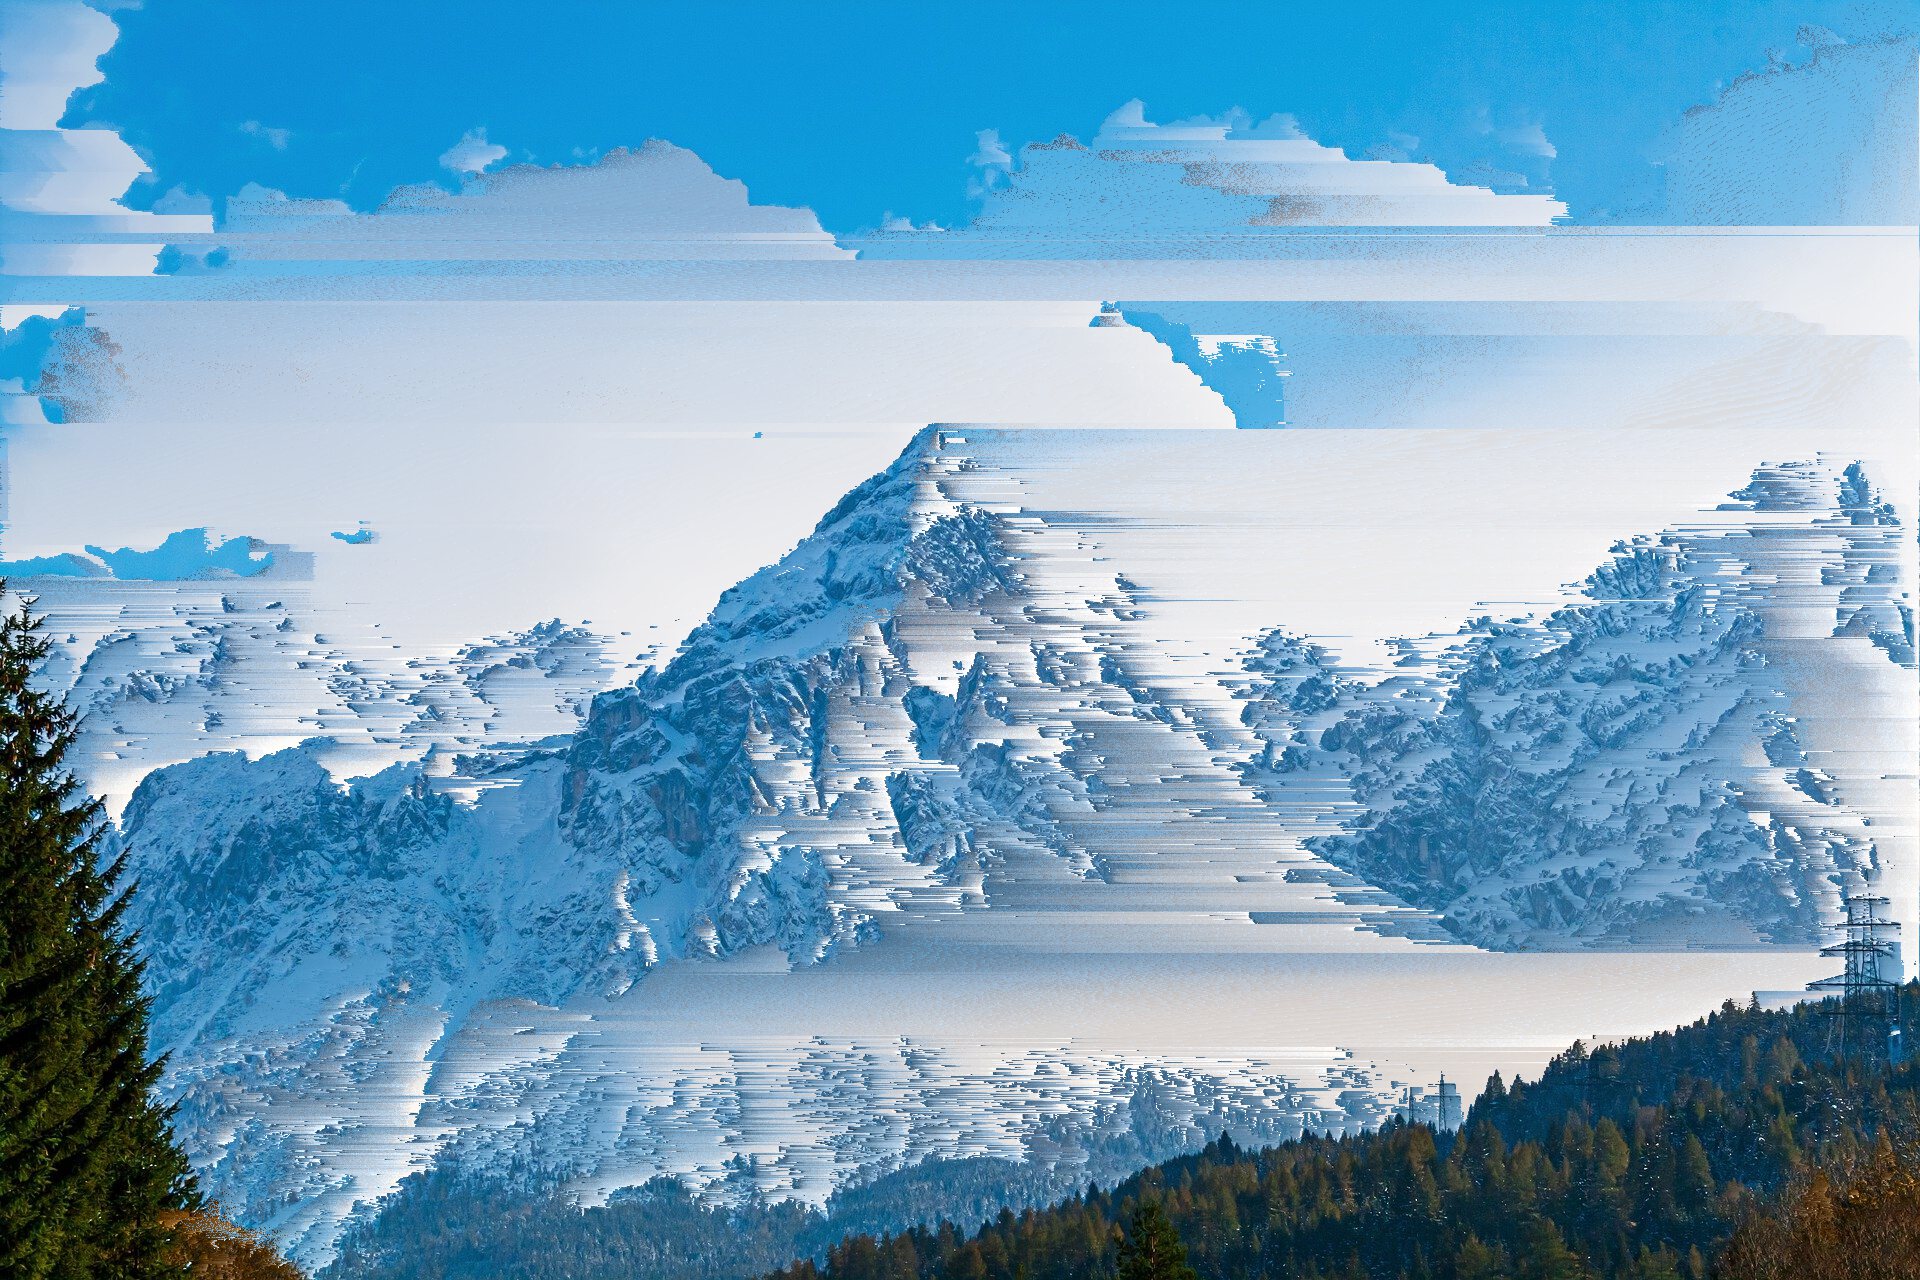 "An image of mountains with a pixel sorting effect applied. The effect is glitchy and produces several gradients along each row of the image."